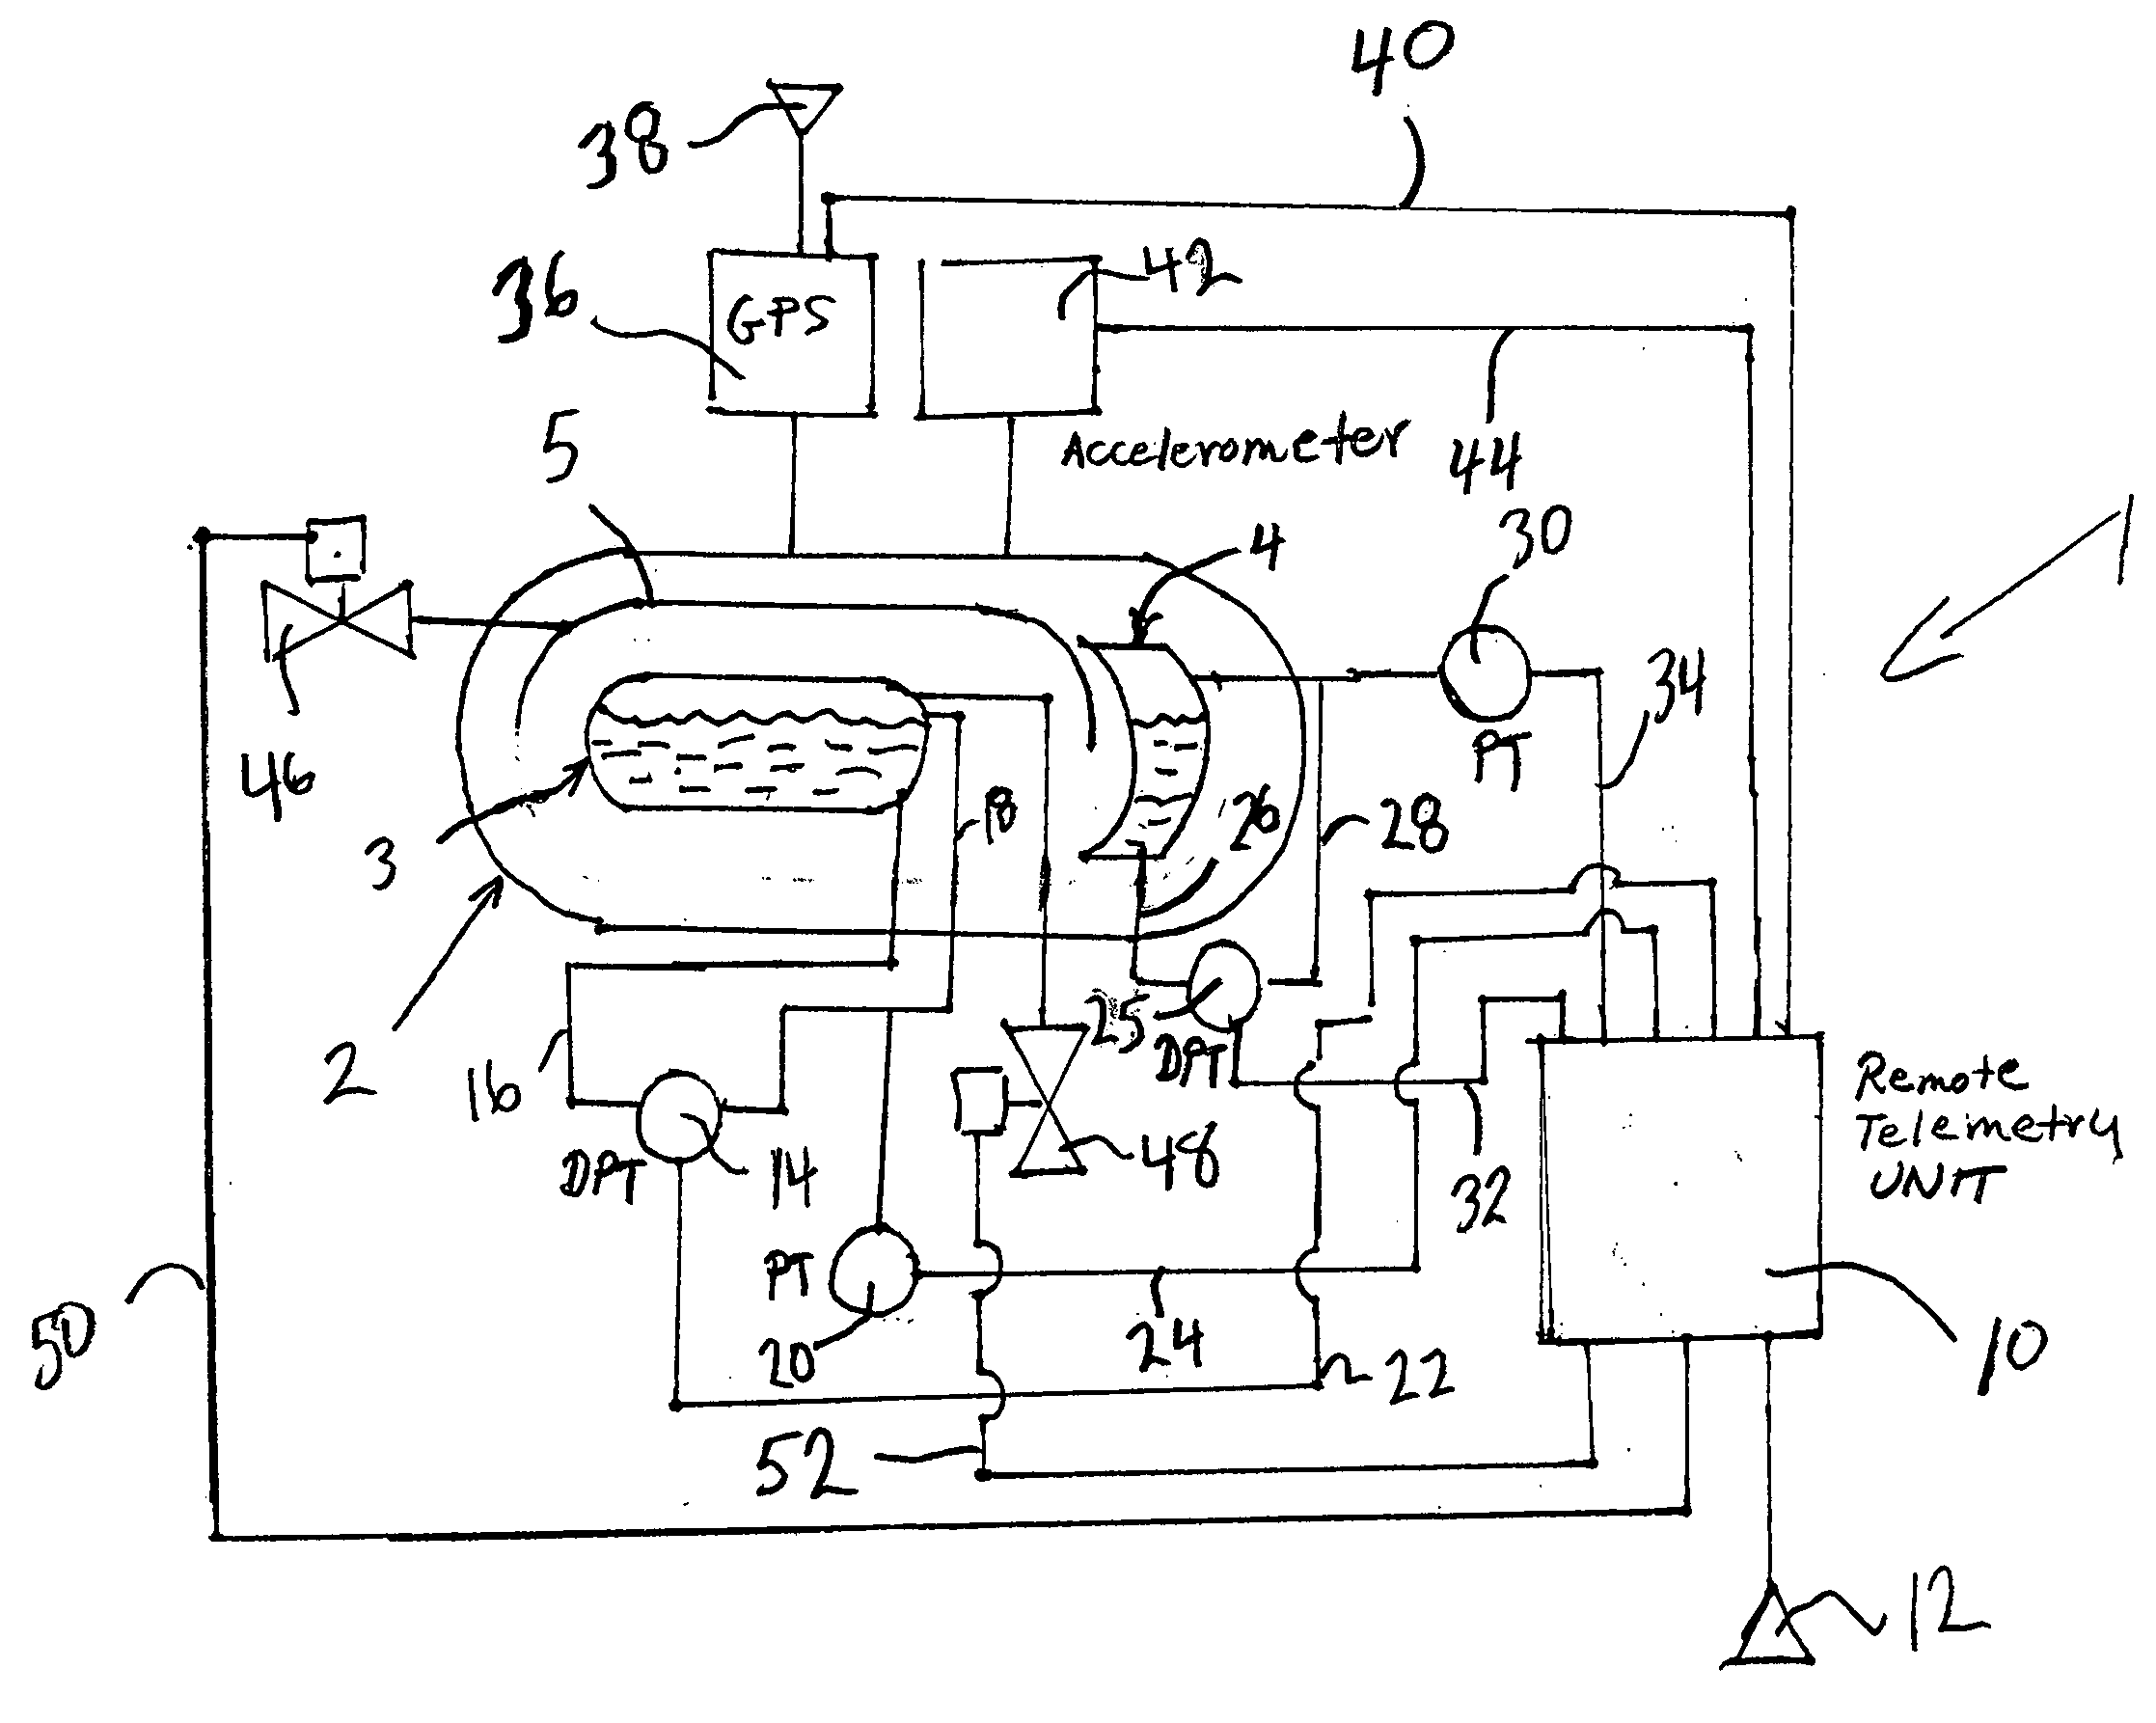 Monitoring system for a mobile storage tank